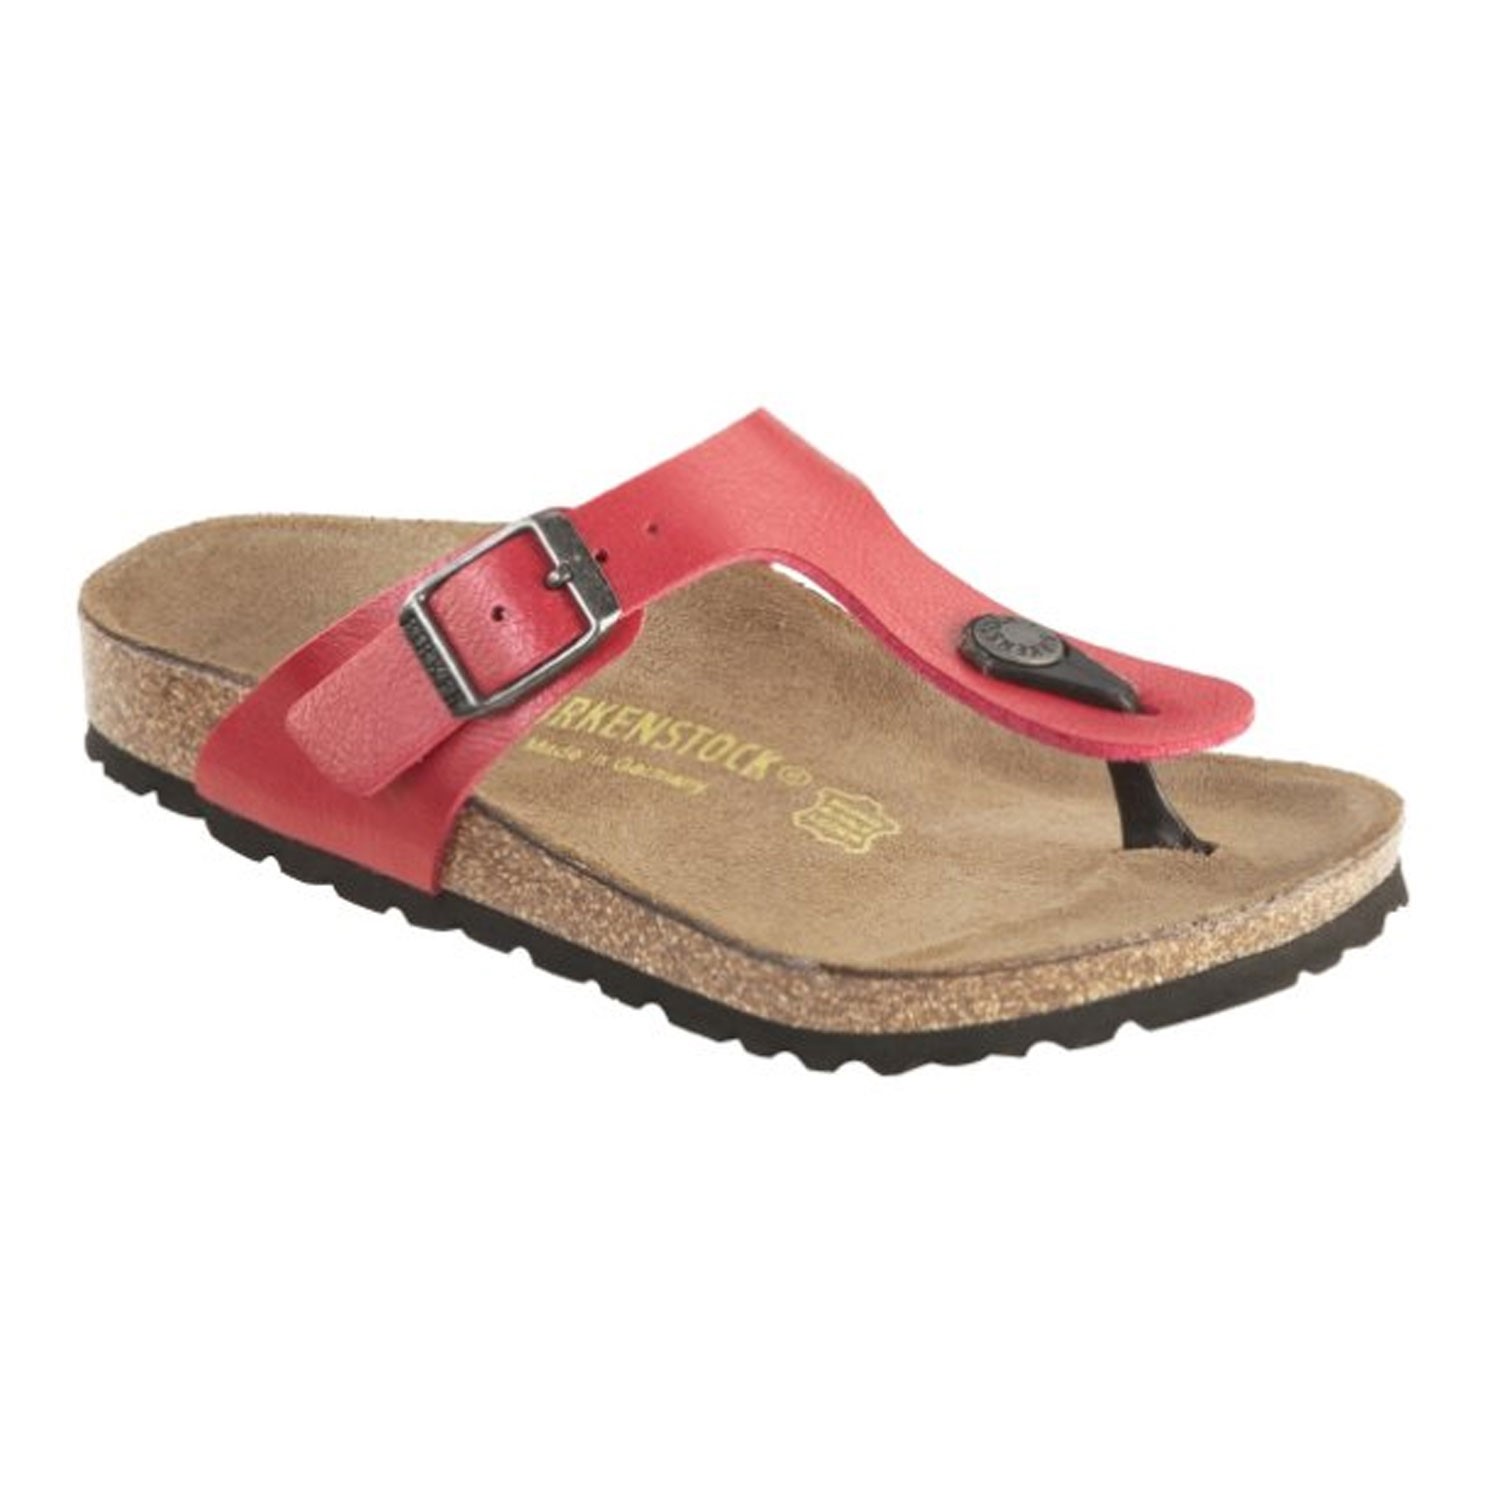 Birkenstock Gizeh Rose Red Kids - Everyday shoes - Shoes - Timarco.eu